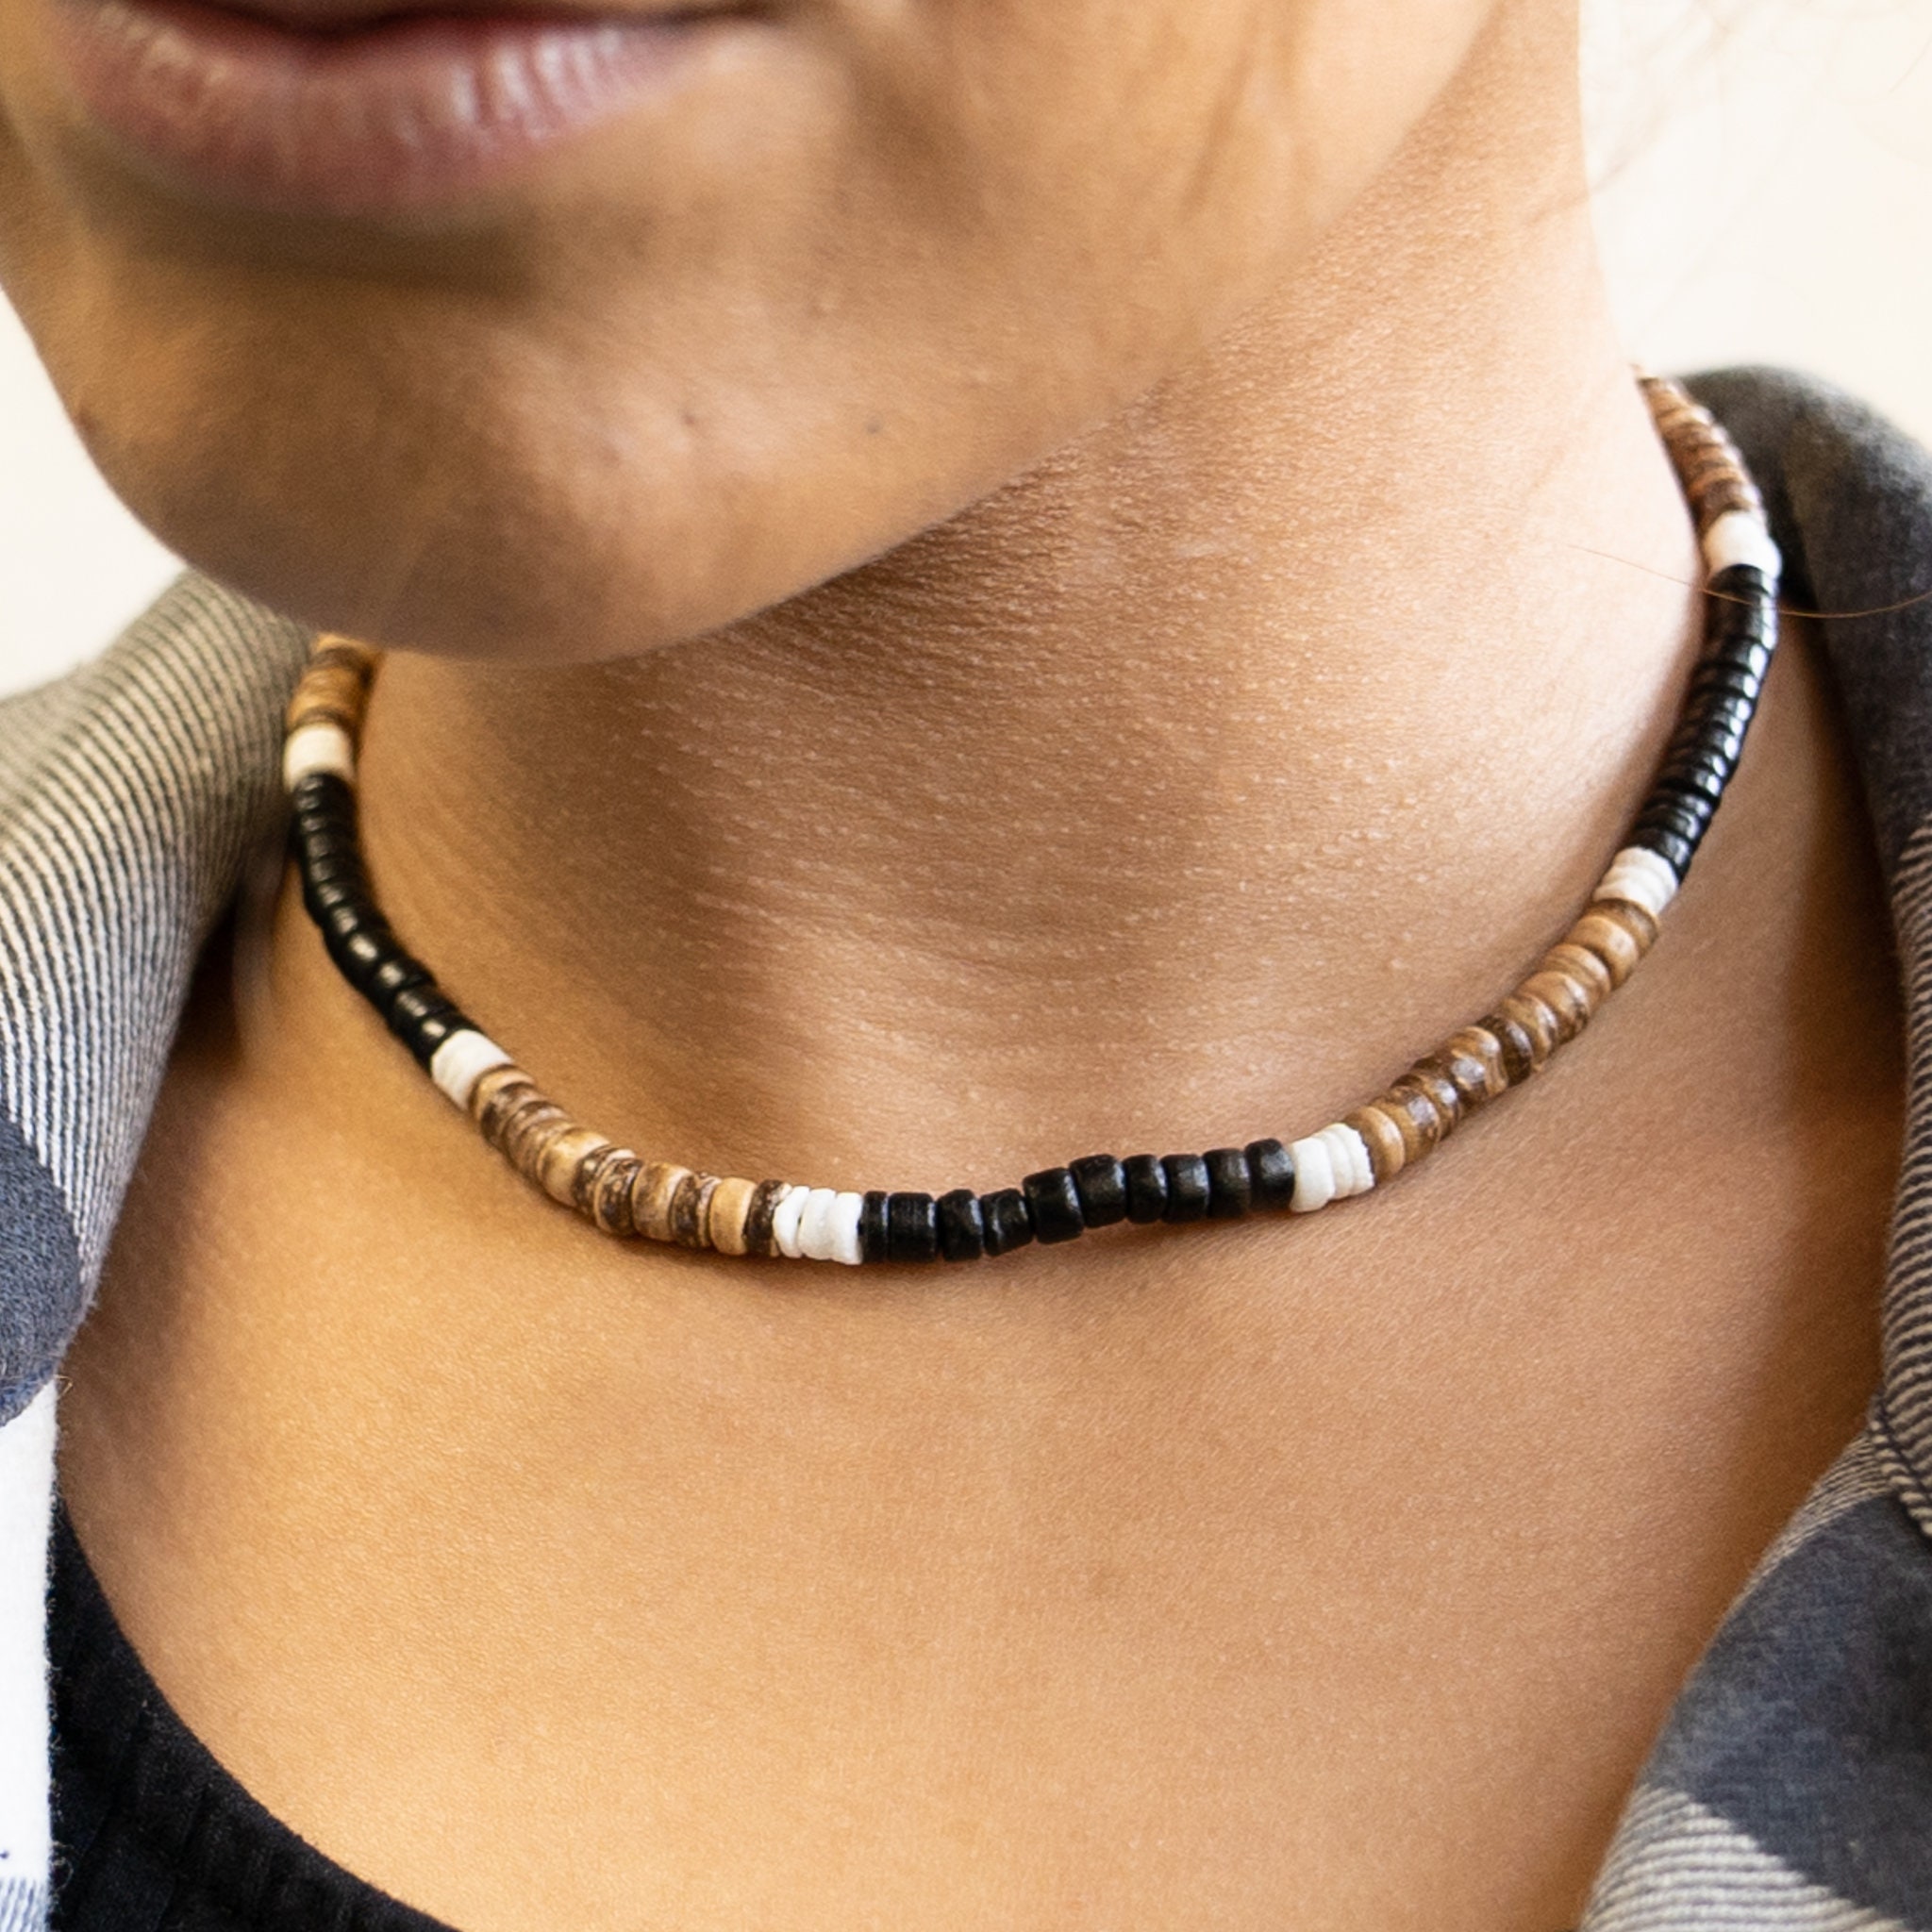 Stone Bead Surfer Necklace Made from white Black and Blue Beads for men  tribal jewelry | Wish